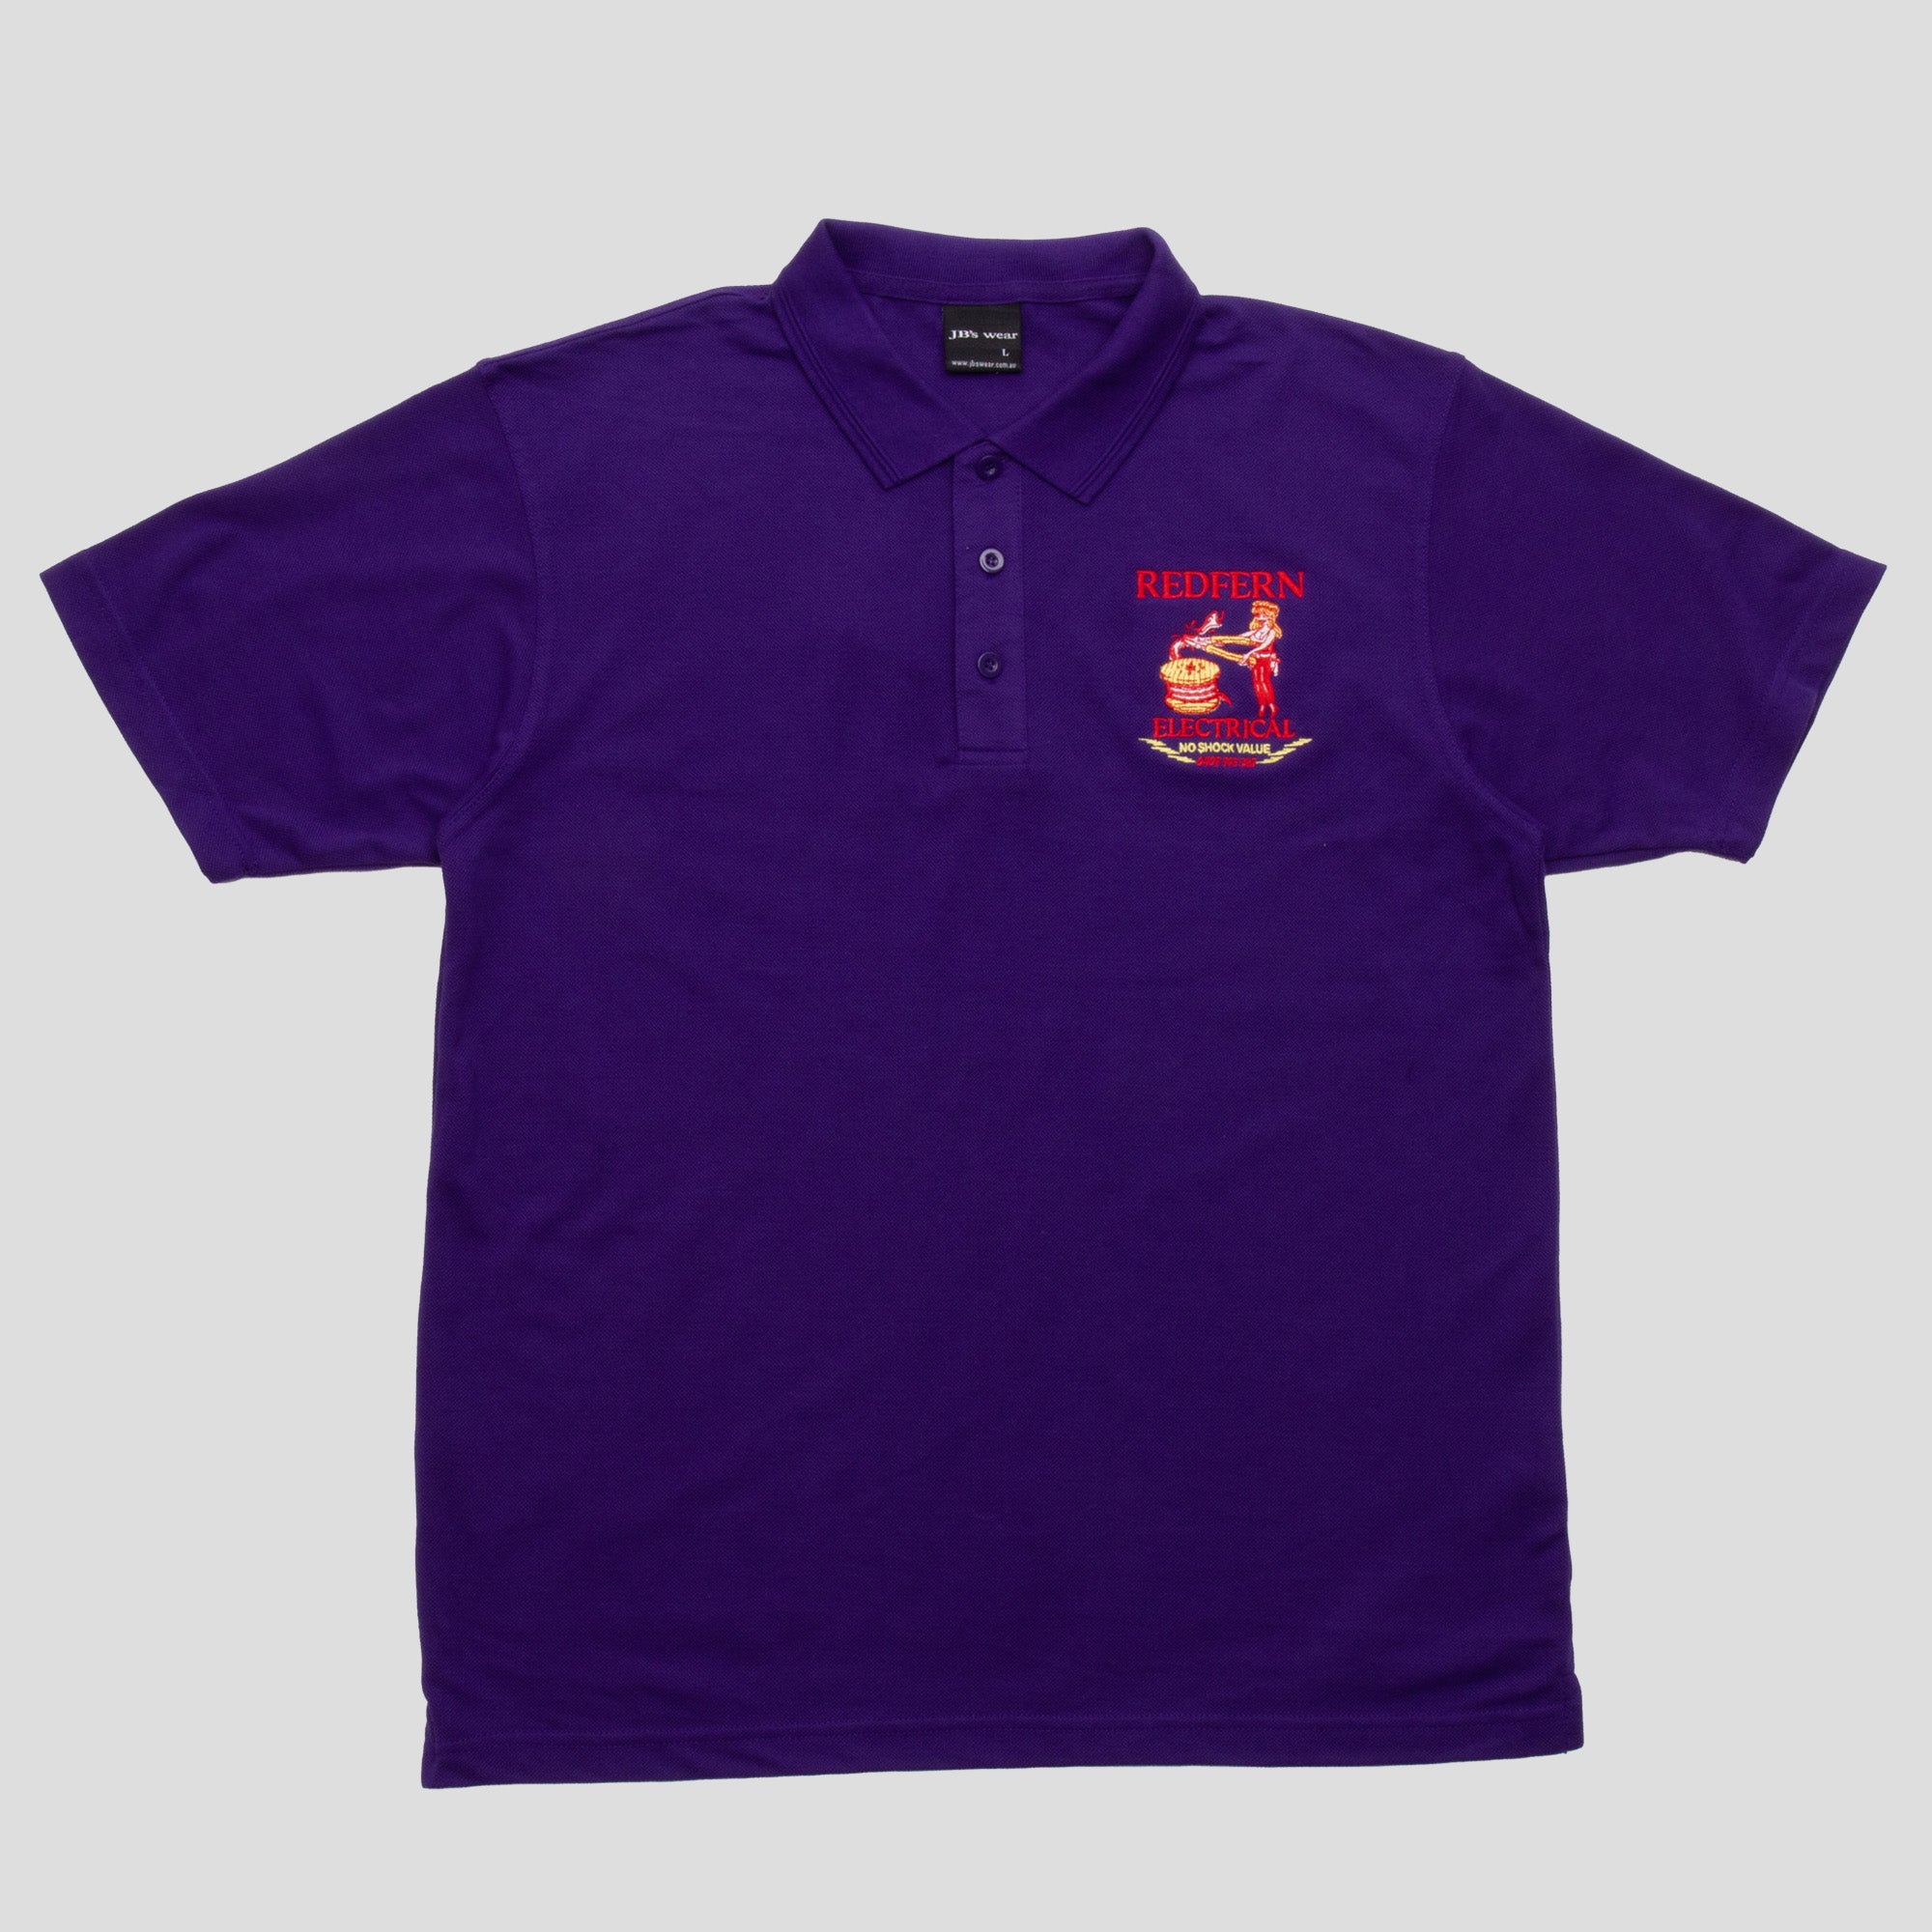 REDFERN ELECTRICAL "NO SHOCK VALUE" POLO PURP